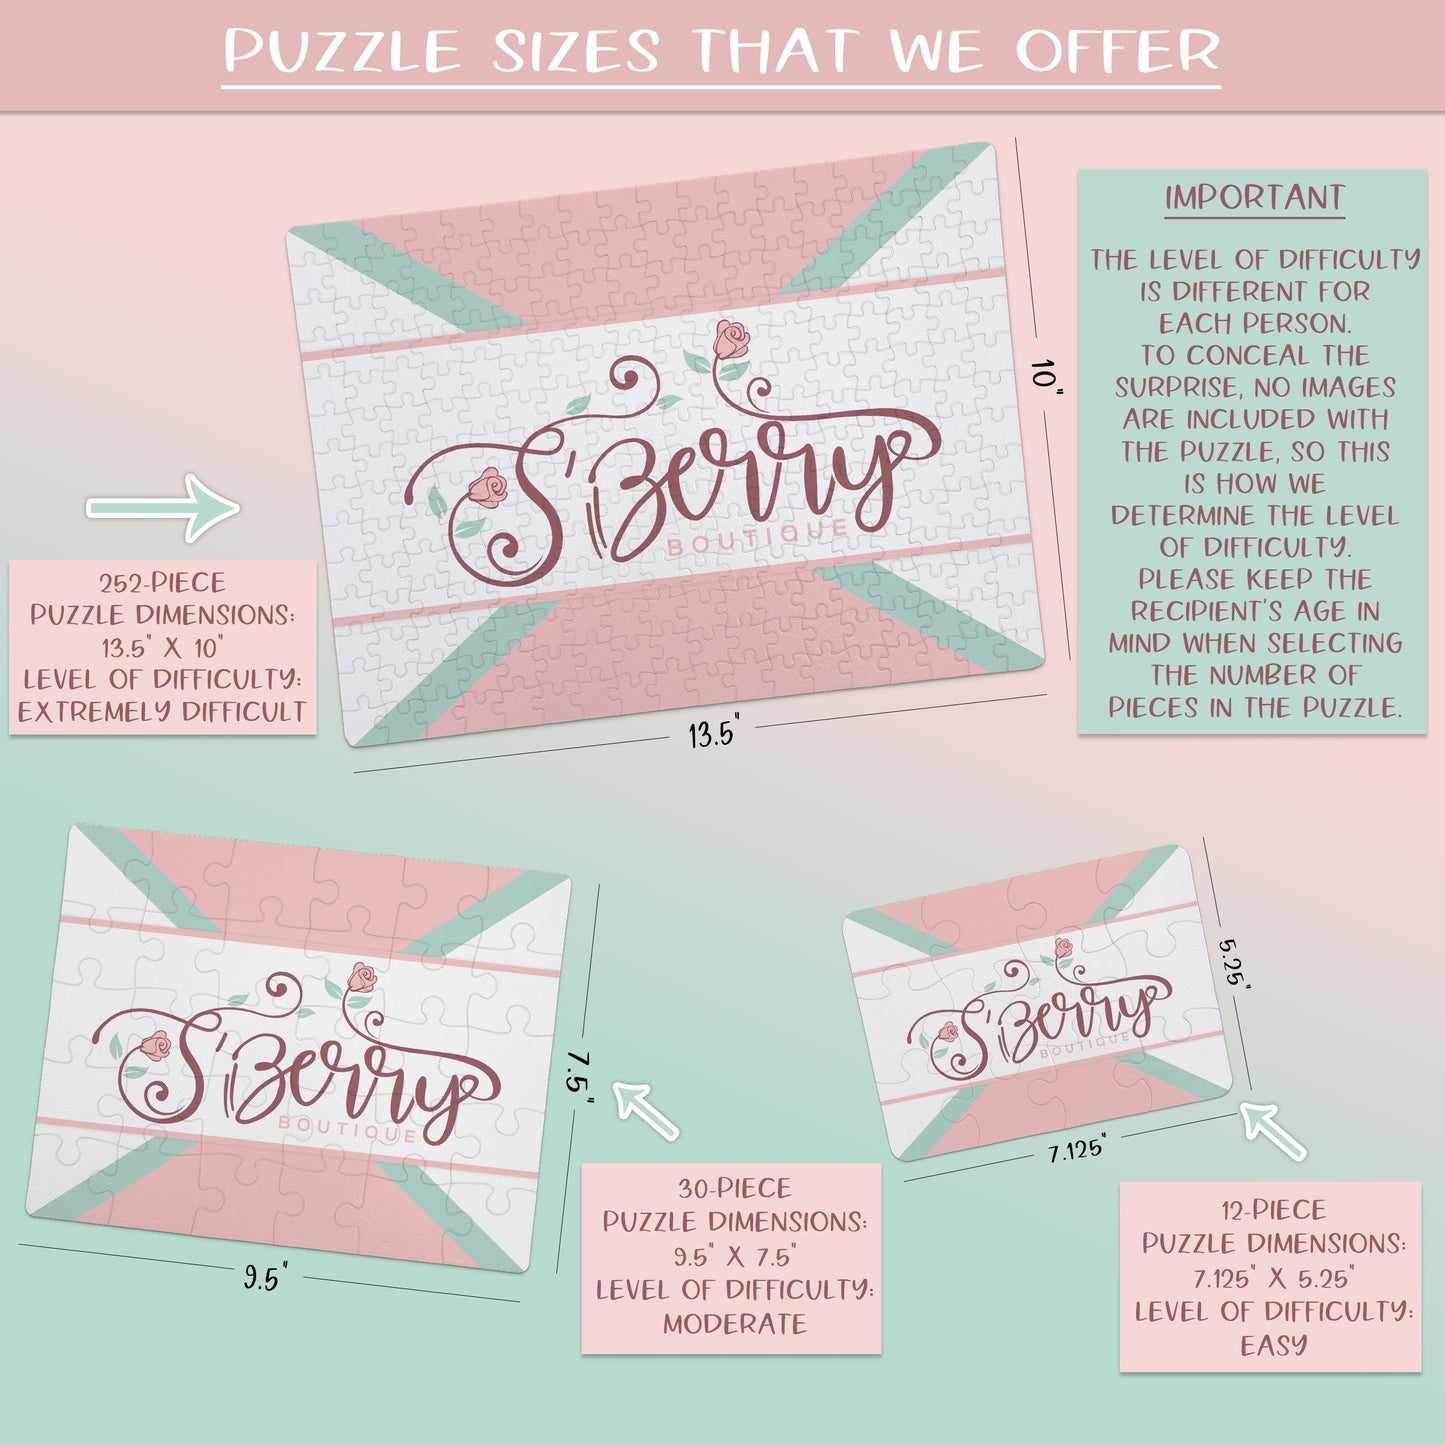 Create Your Own Puzzle - Floral Design - CYOP0060 | S'Berry Boutique